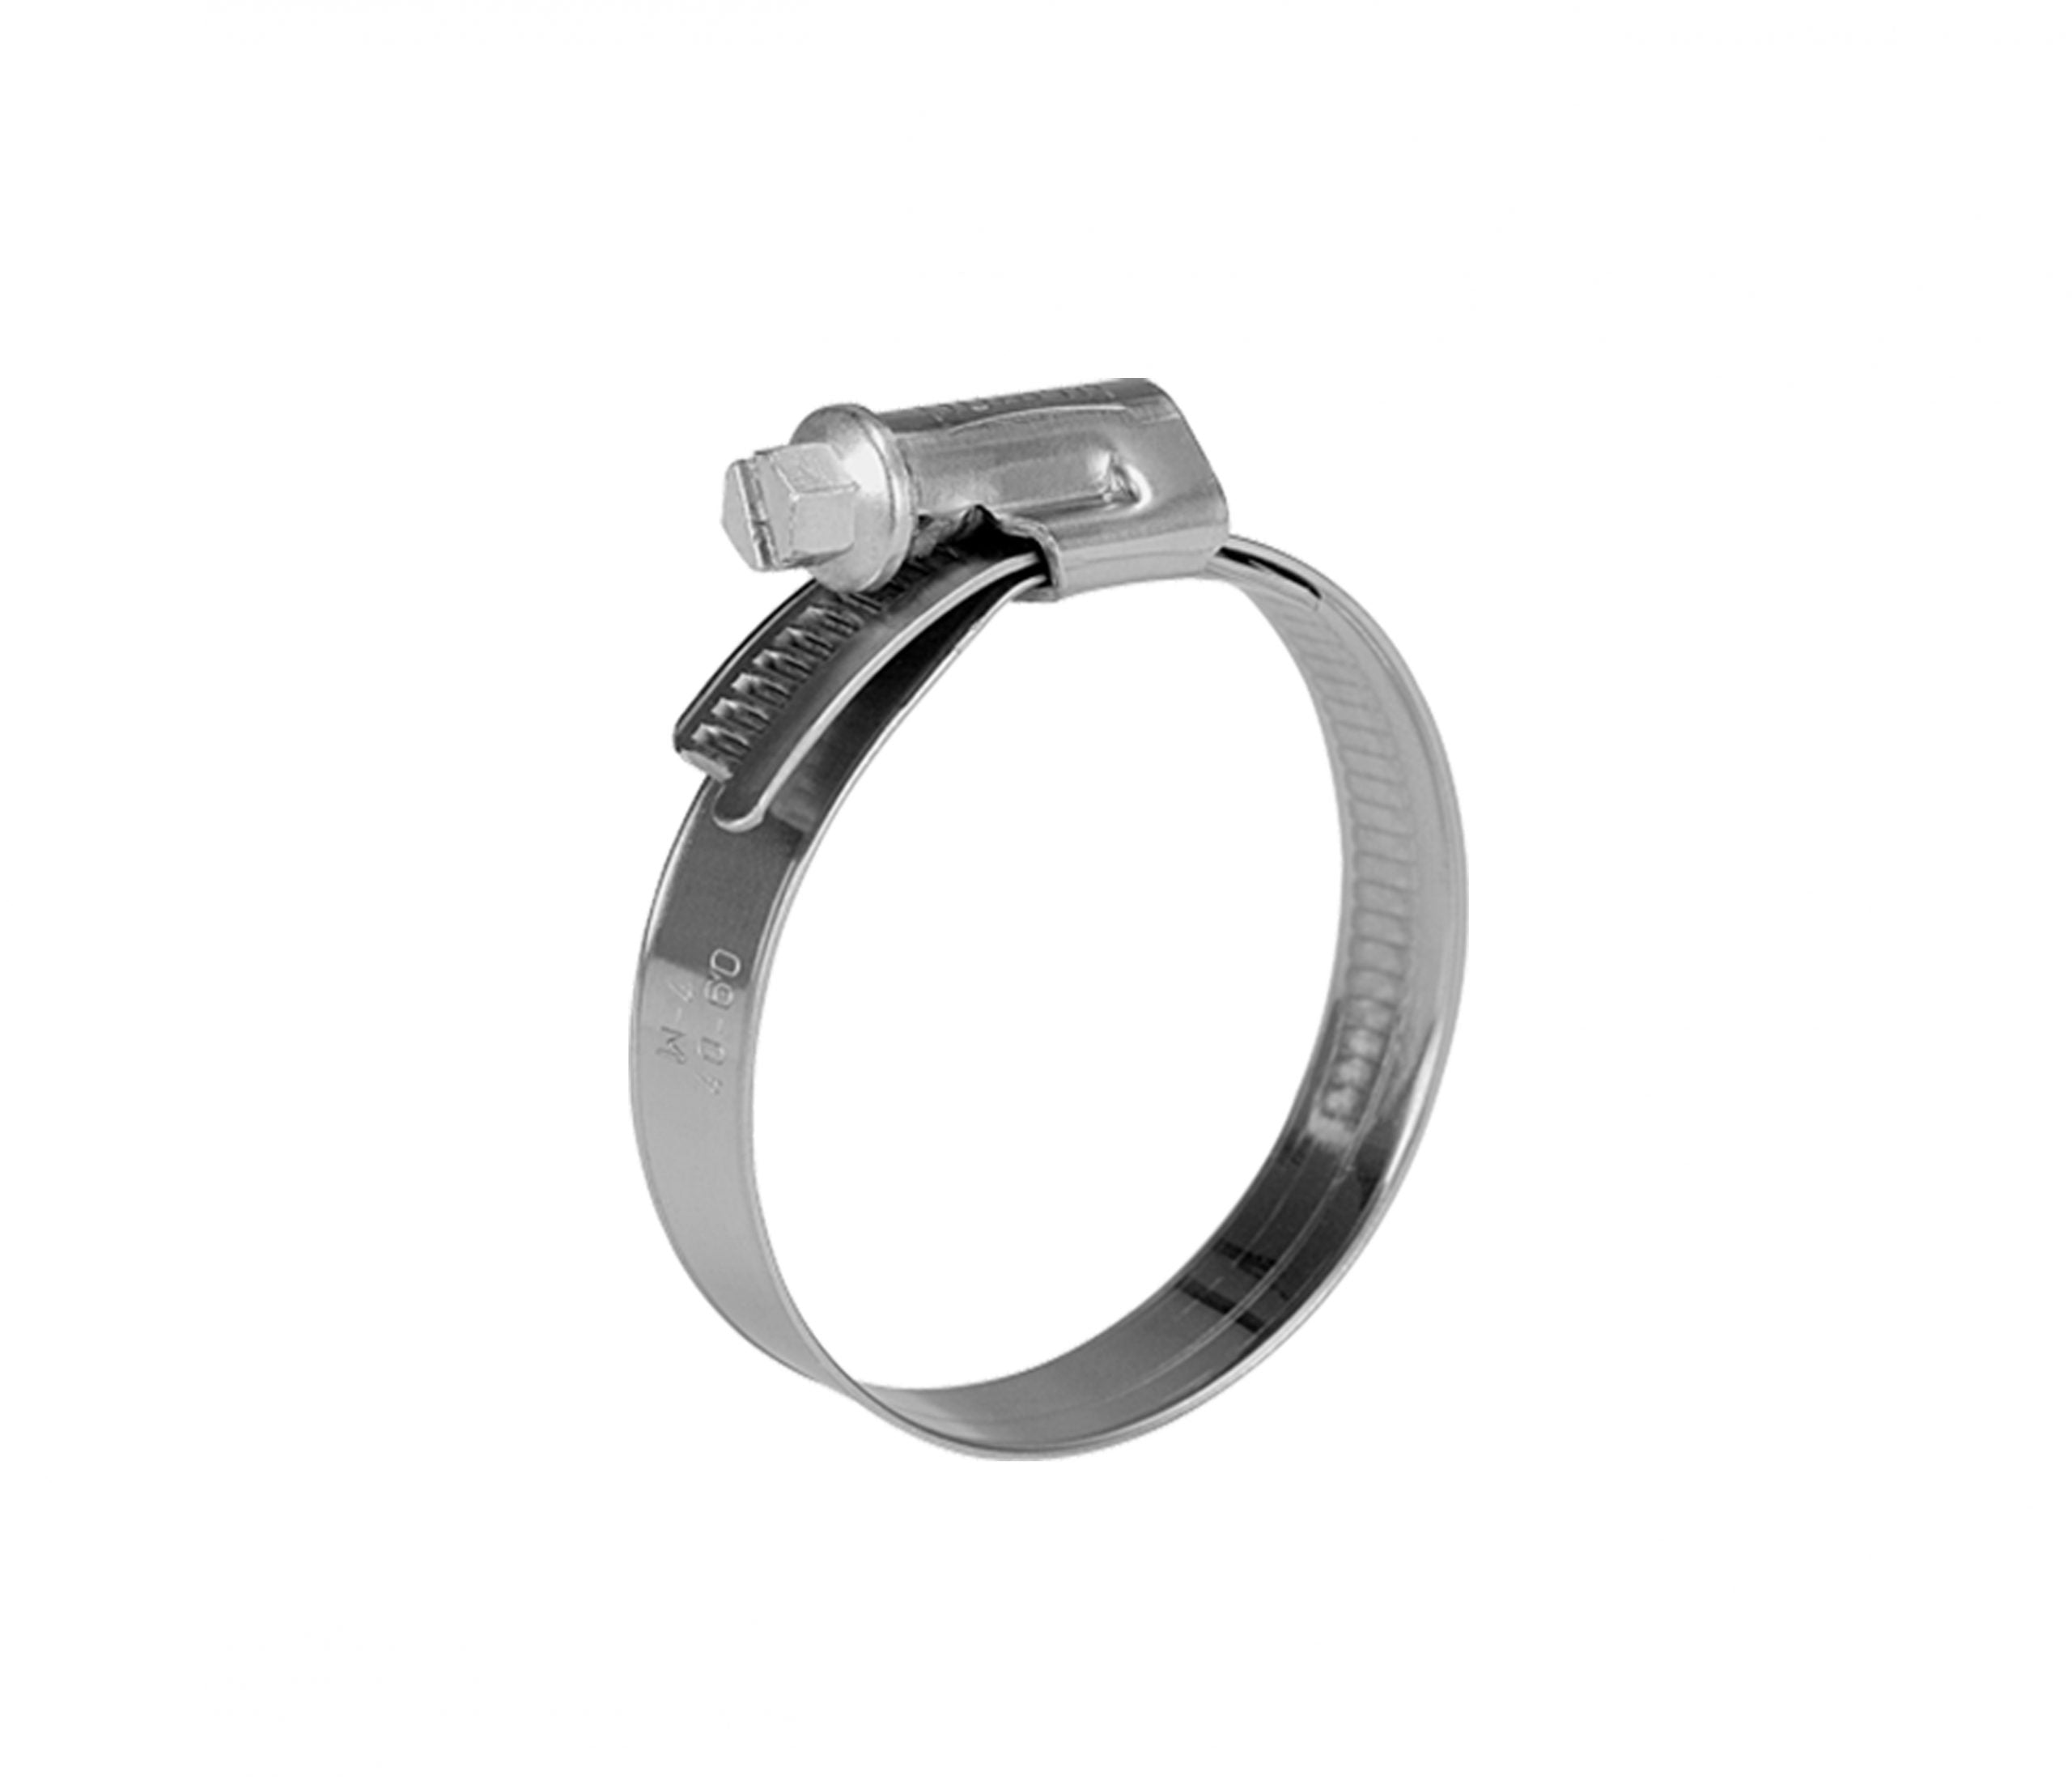 30-45mm Stainless Steel Hose Clamp with Worm Drive 722-3045 by Norma